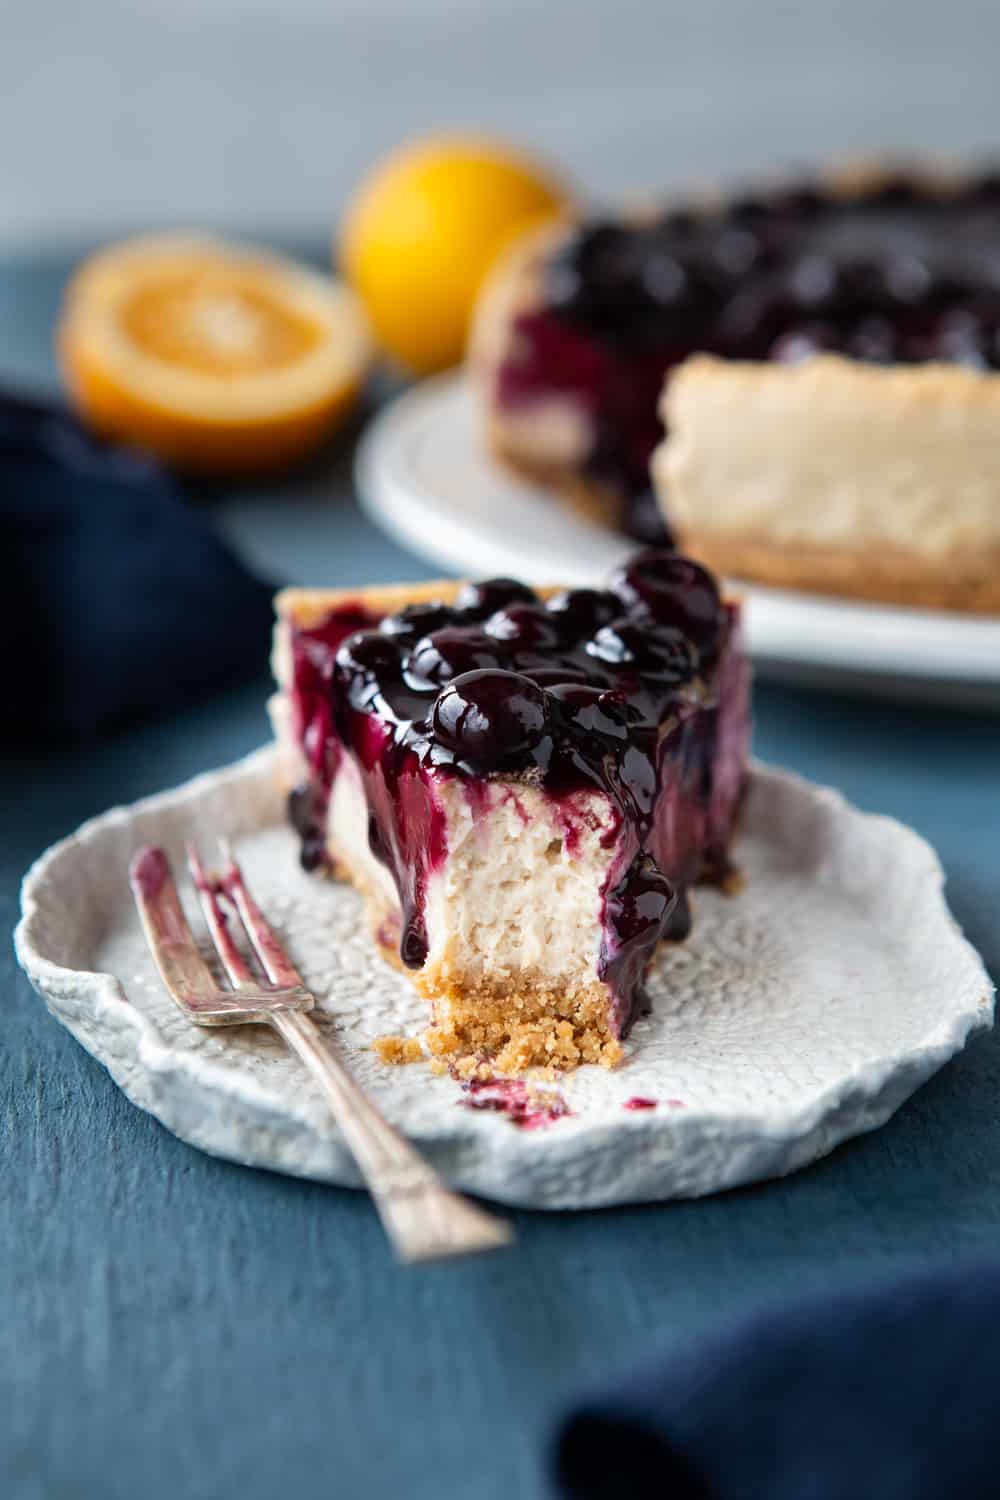 Baked Vegan Blueberry Cheesecake slice with an eaten piece